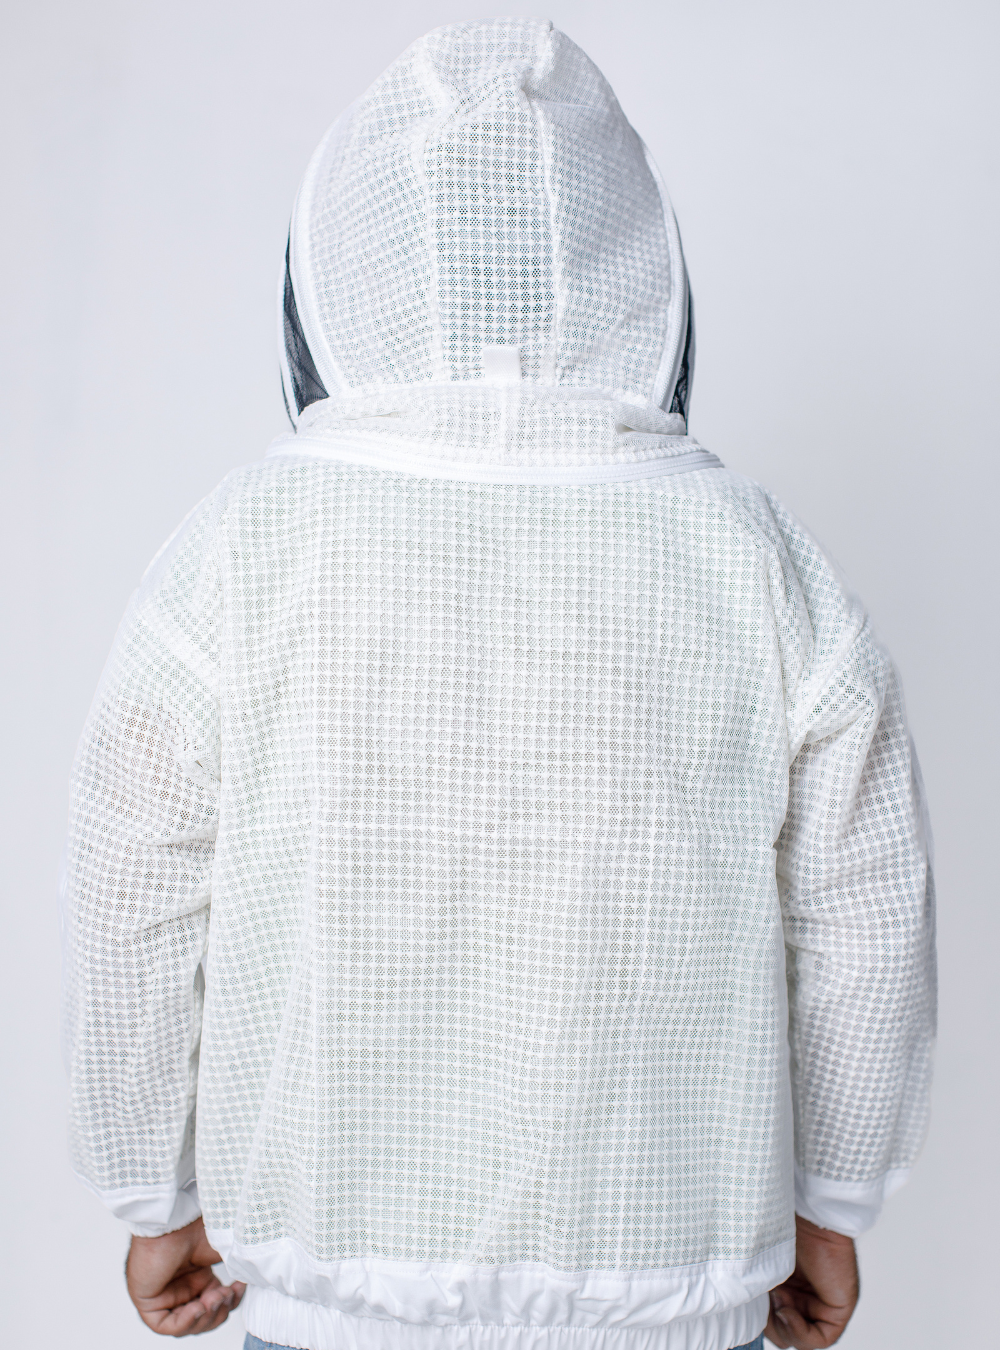 A 3 layer ventilated 'BeeAir White Jacket' for beekeeping, with Fencing Veil Back Look